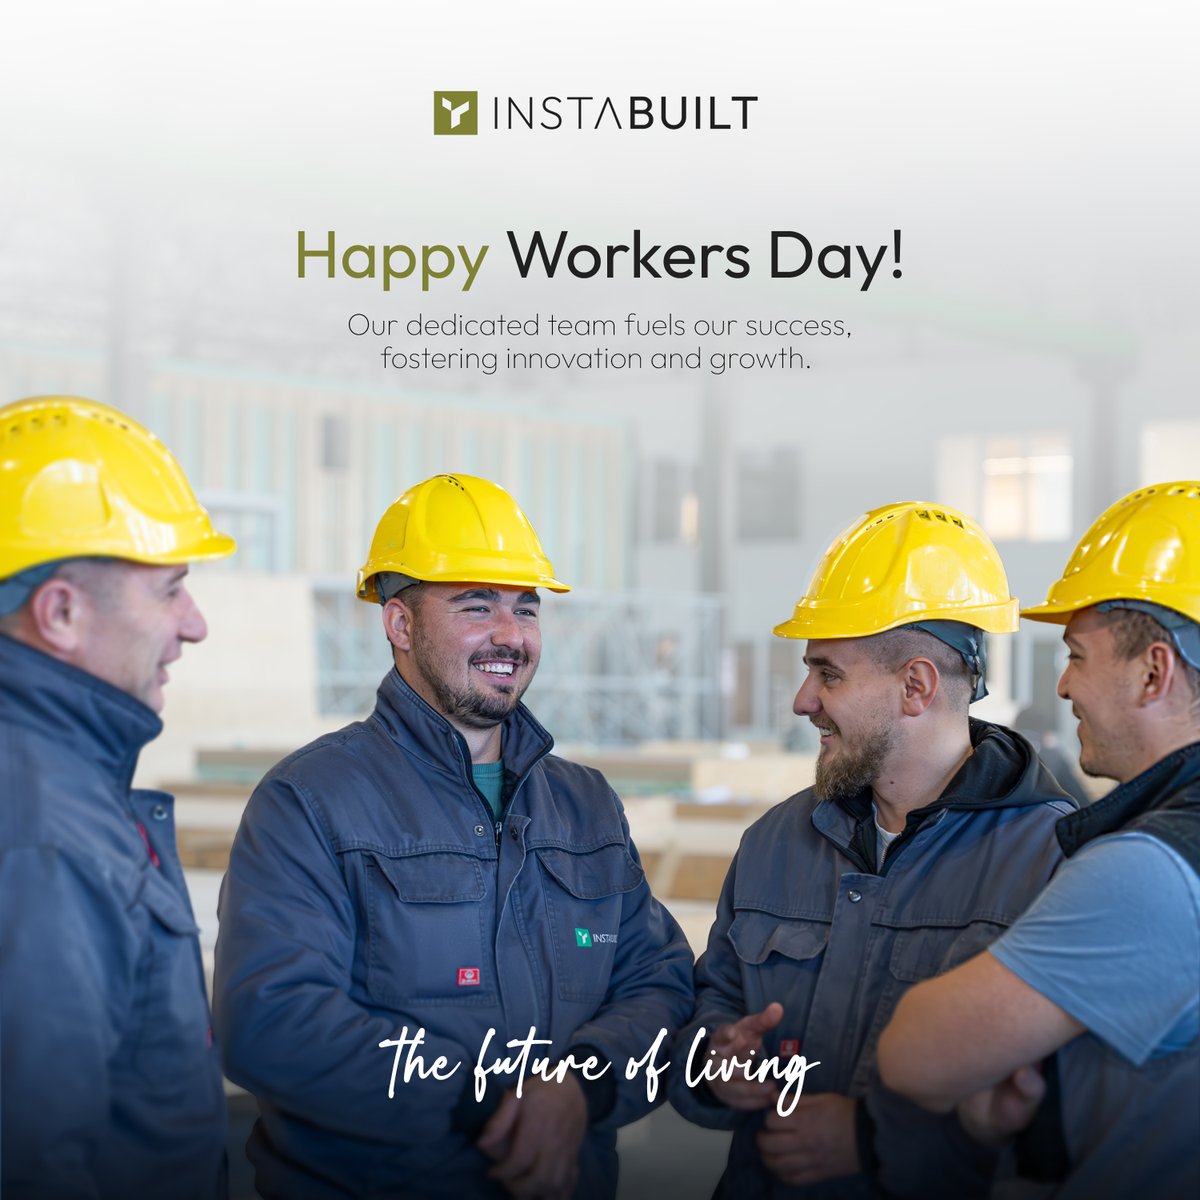 Our dedicated team fuels our success, fostering innovation and growth. Happy Labour Day!

#TeamSuccess #Innovation #Growth #TeamworkMakesTheDreamWork #LaborDay